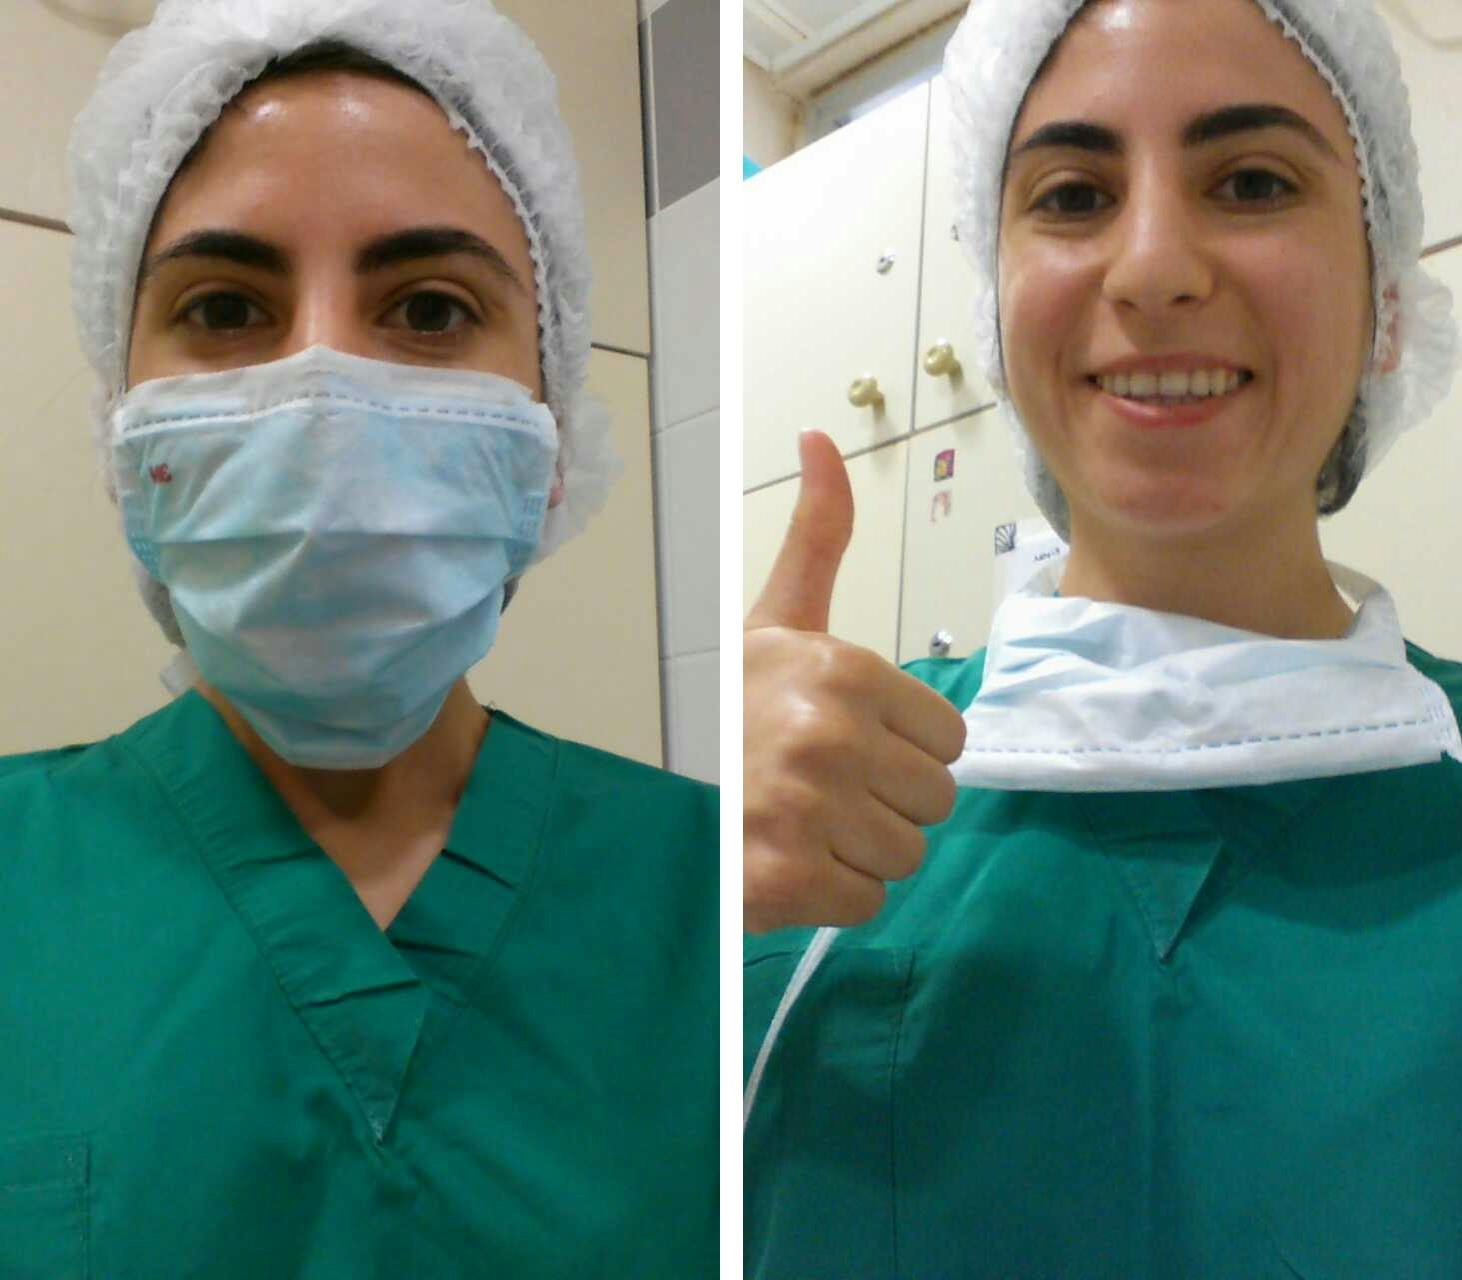 Assisting at a surgery during my internship (as you can tell, the surgery went well!)